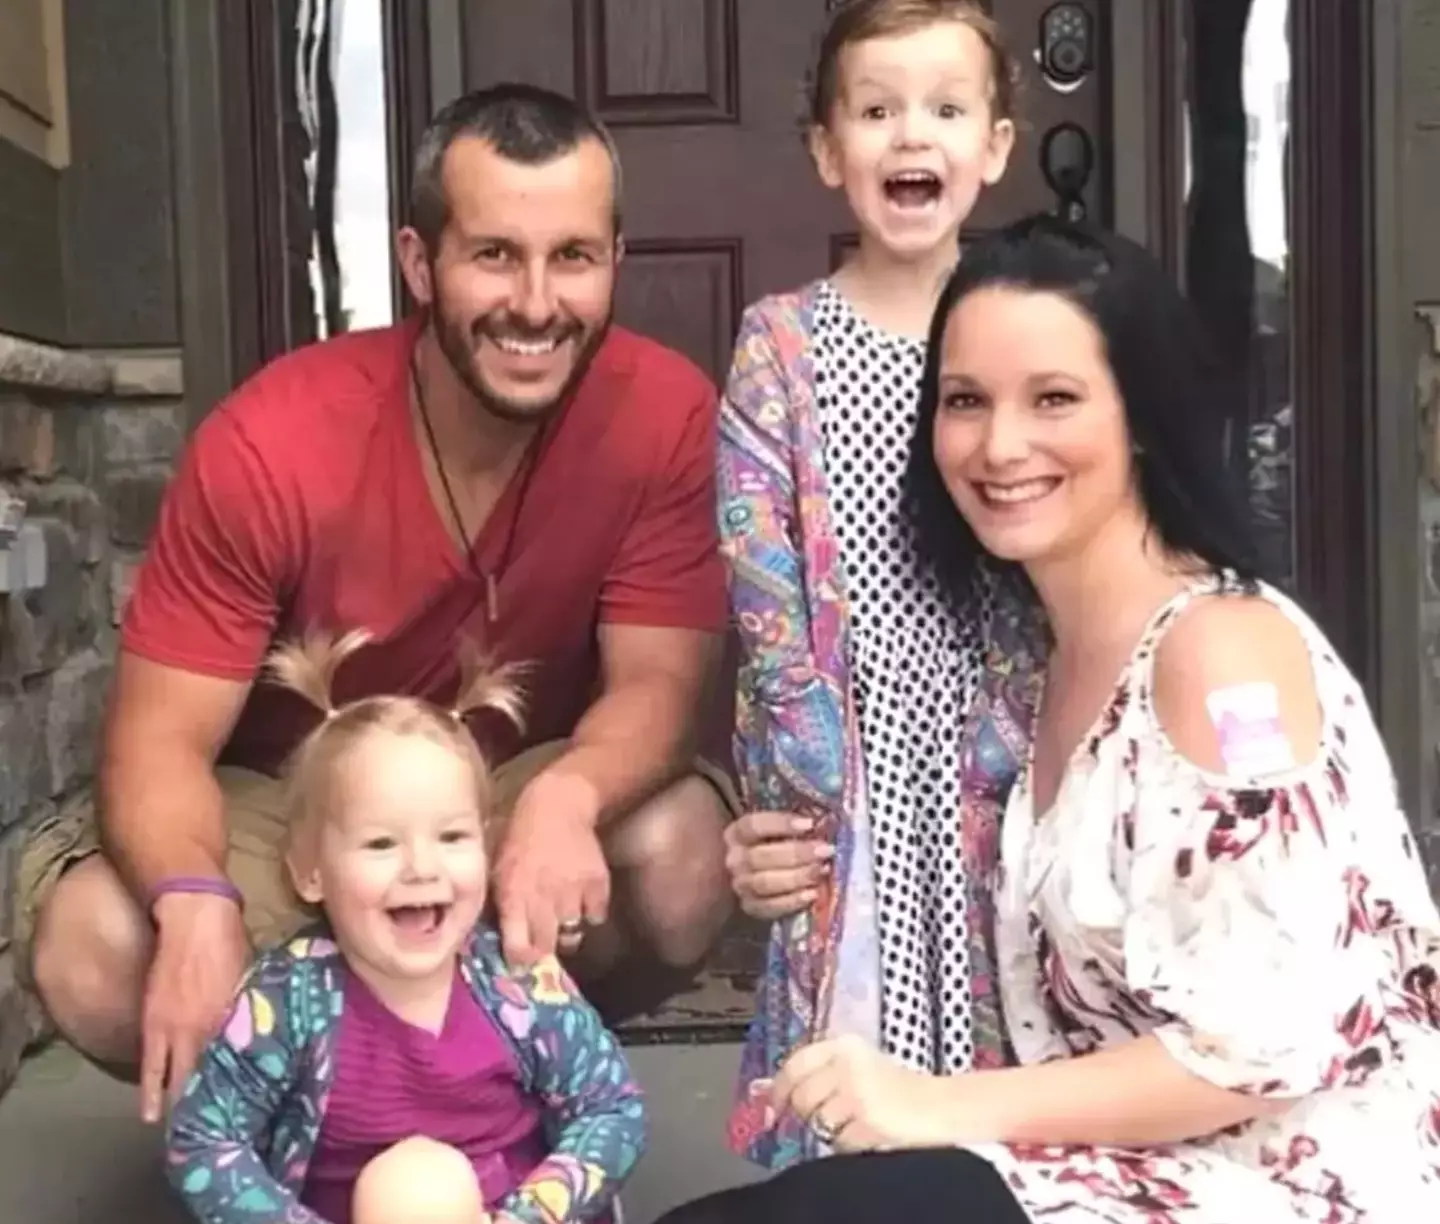 Chris Watts killed his pregnant wife Shanann Watts and daughters Bella and Cece.